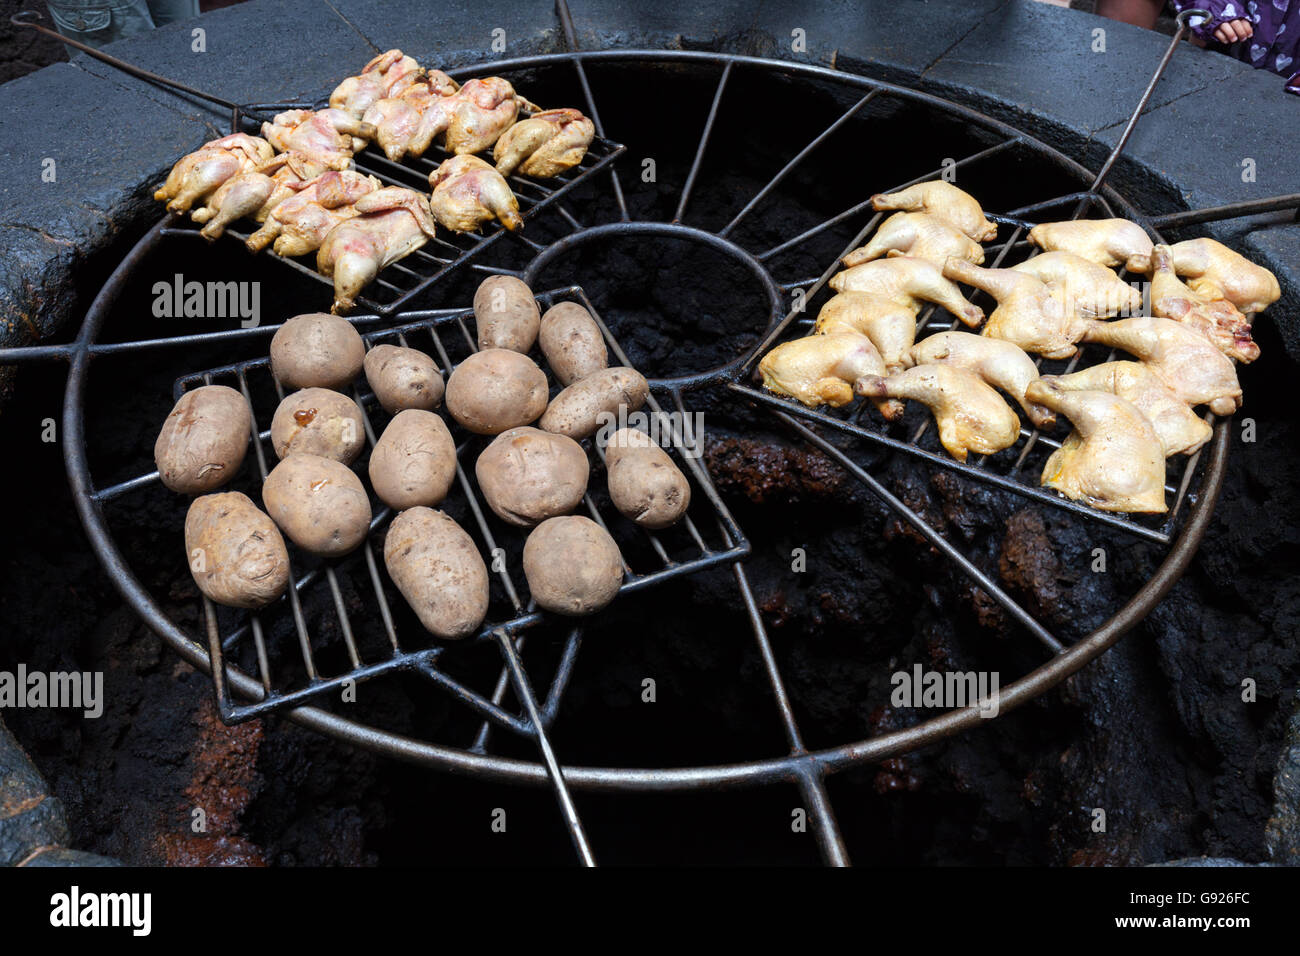 Cooking chicken and baked potatoes over hot vent Timanfaya National Park Lanzarote Stock Photo